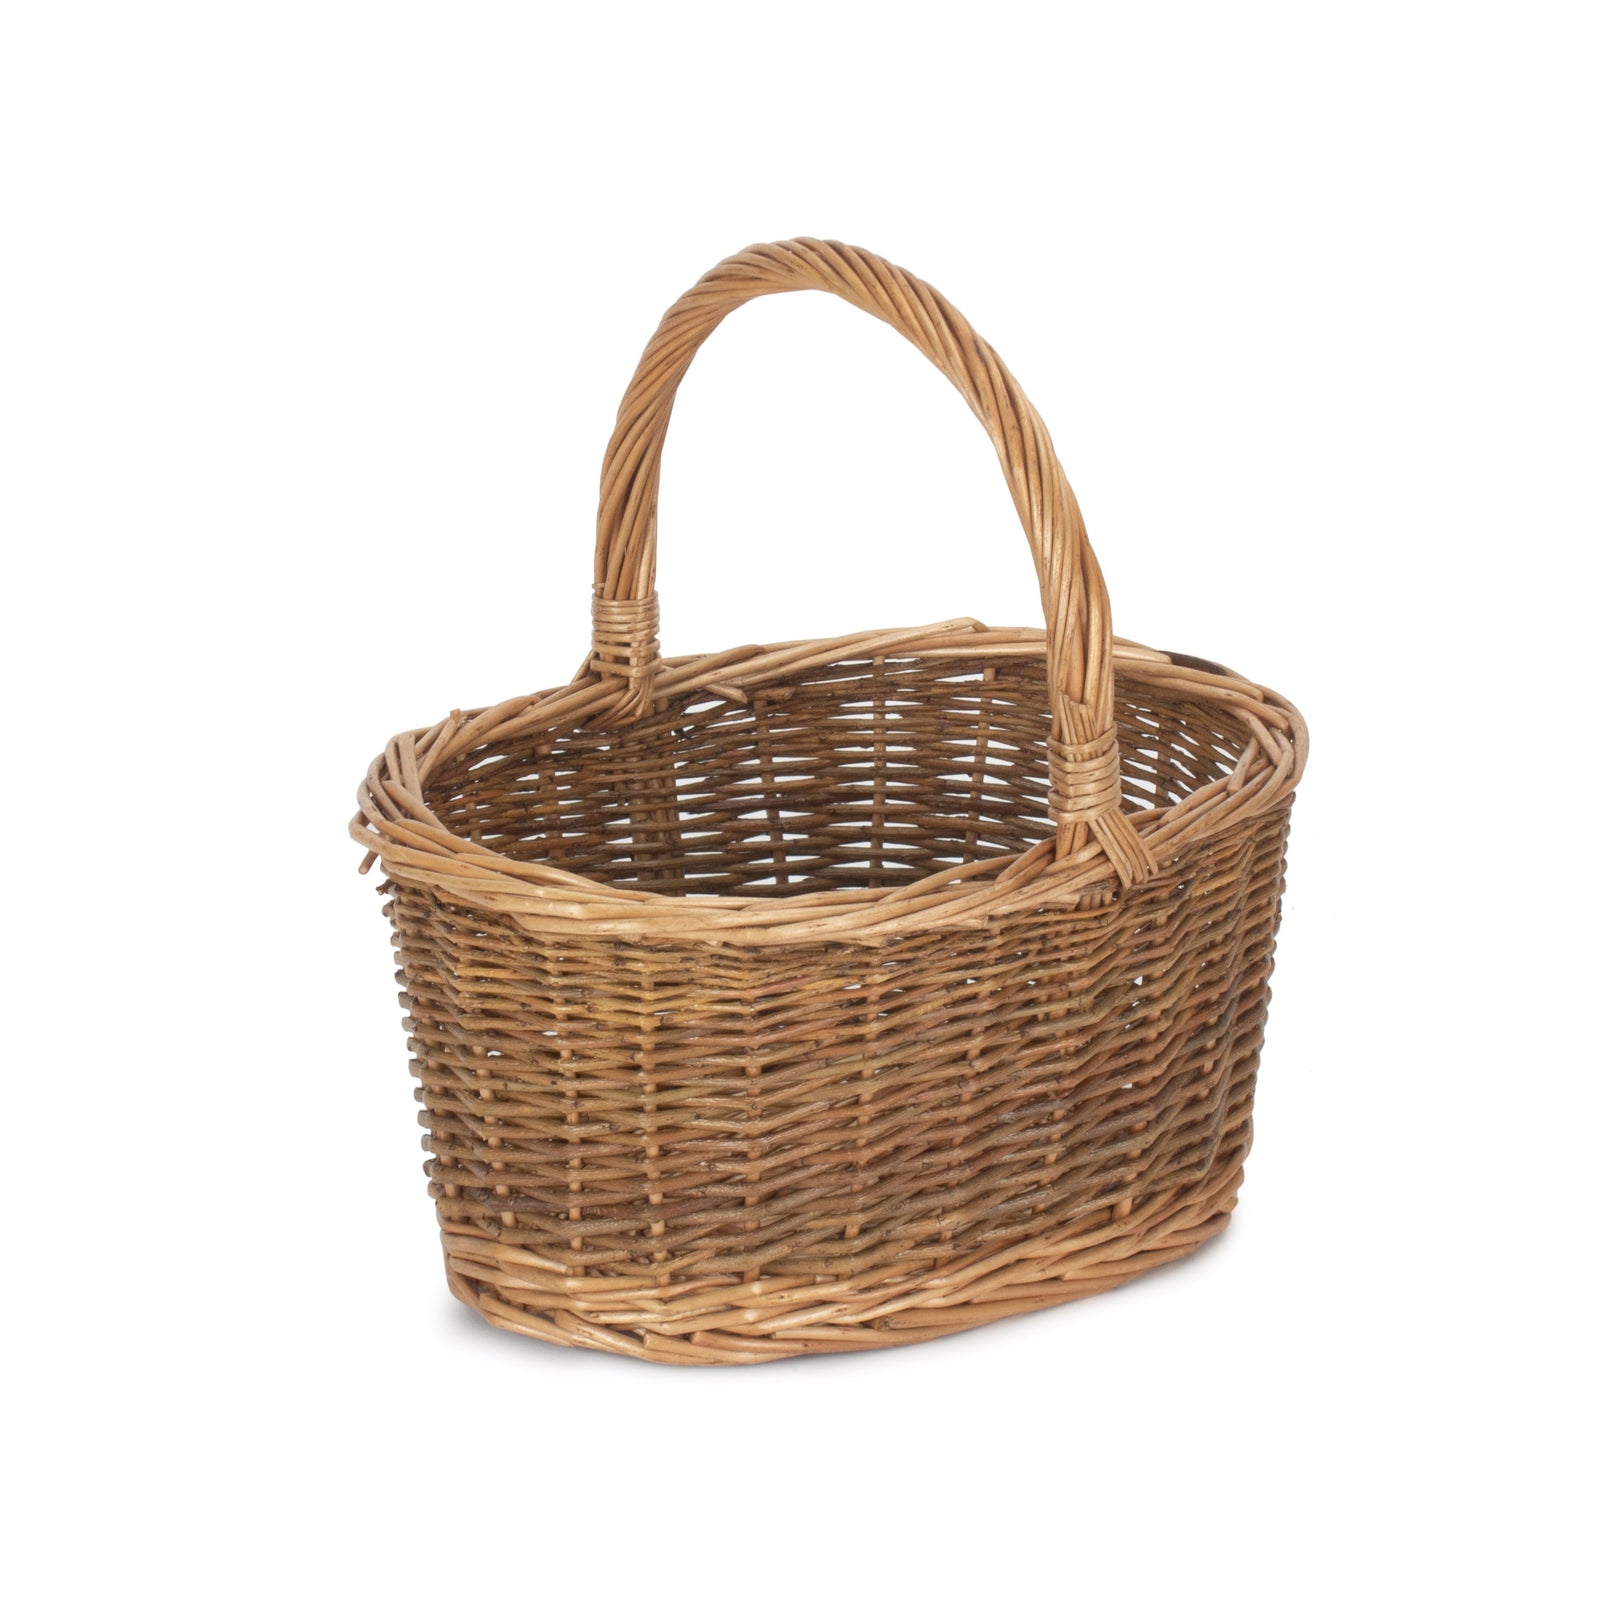 Red Hamper Country Oval Wicker Shopping Basket